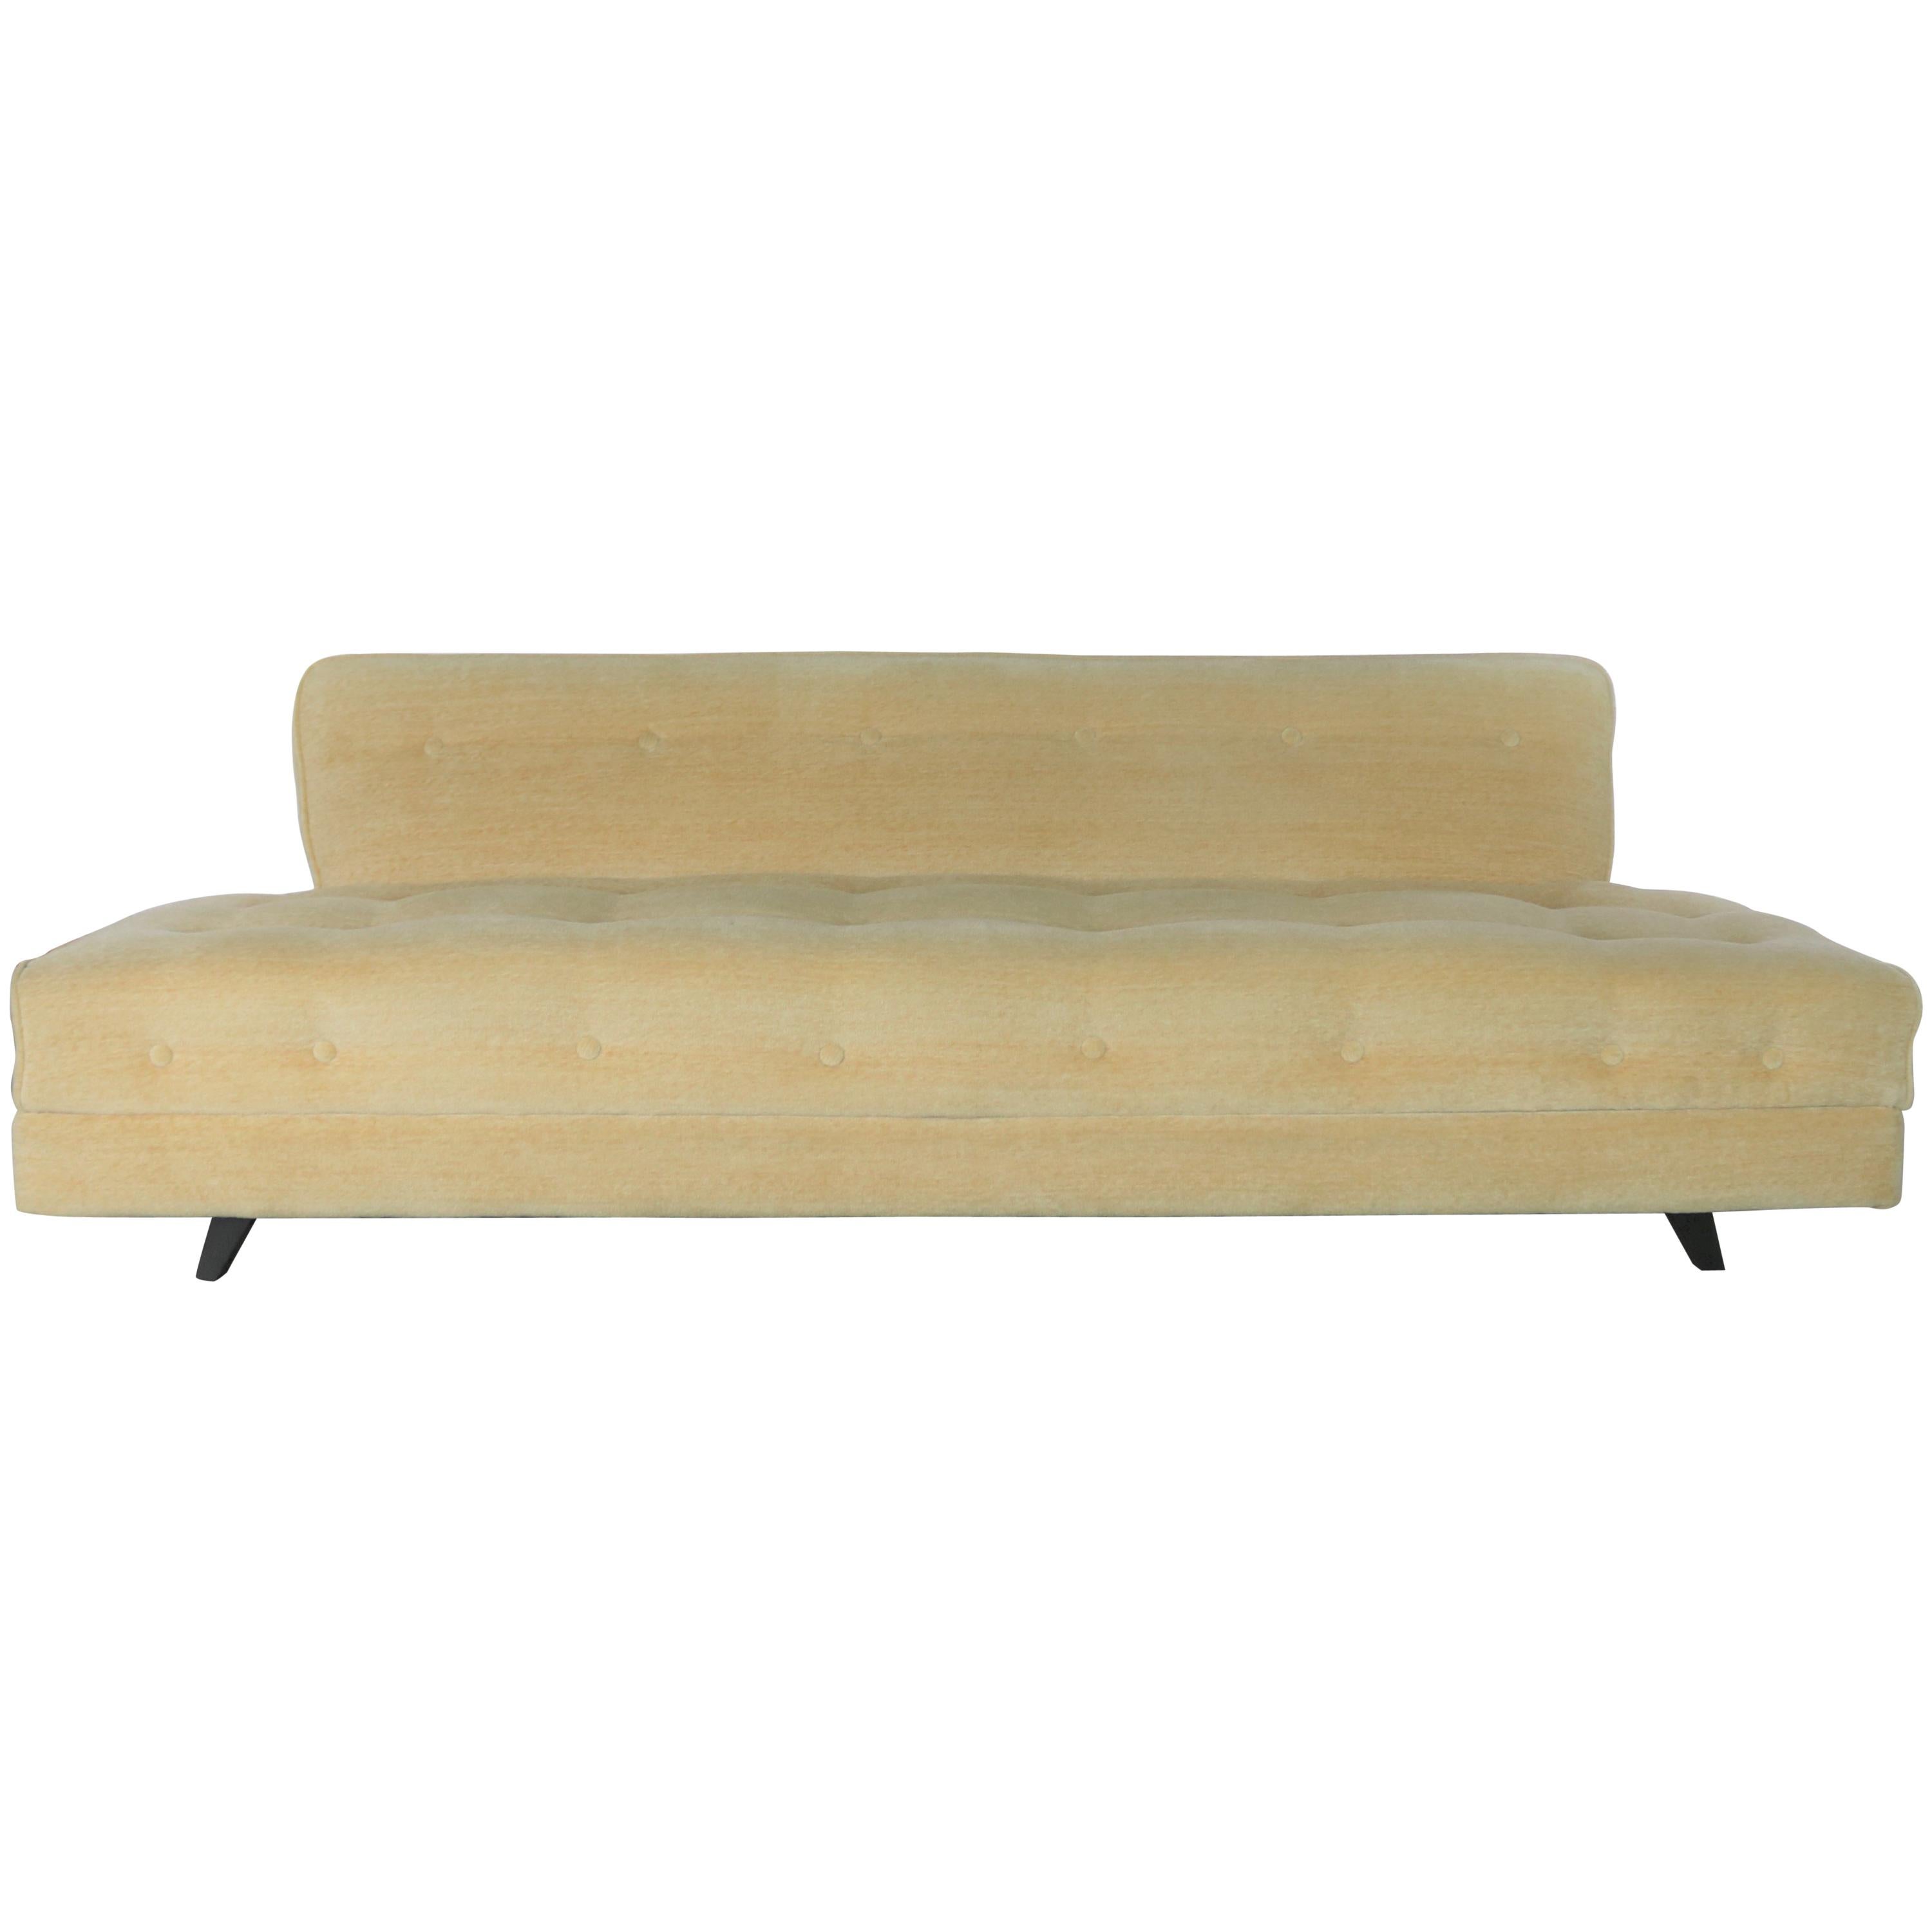 Mid-Century Modern Convertible Sofa Bed Button Detail in Oatmeal Colored Mohair